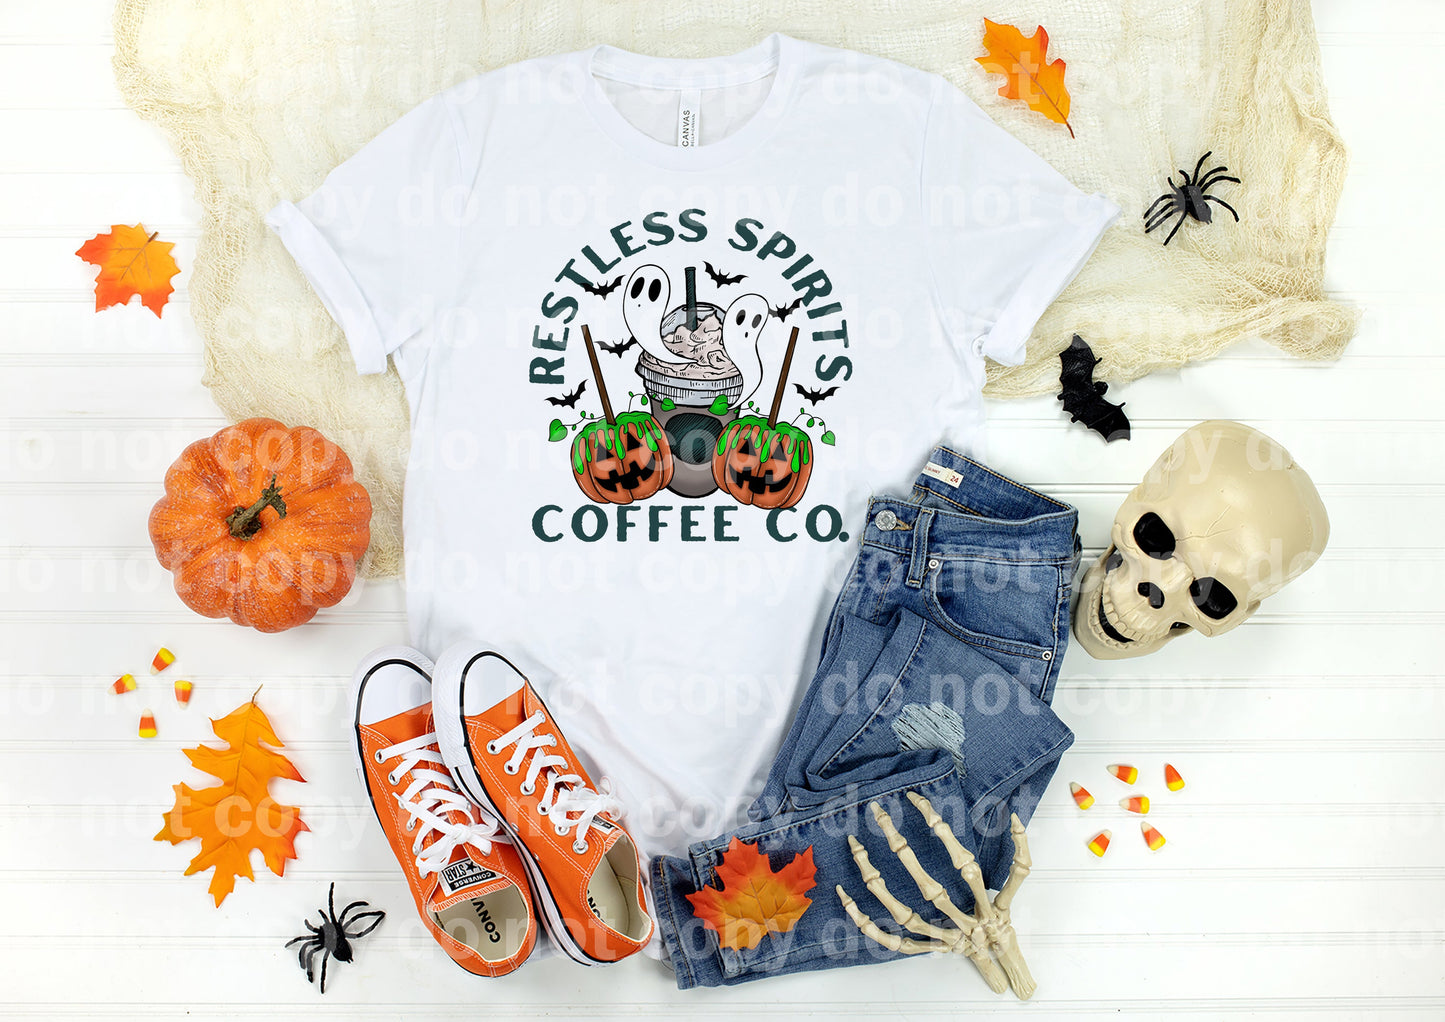 Restless Spirits Halloween with Pocket Option Dream Print or Sublimation Print